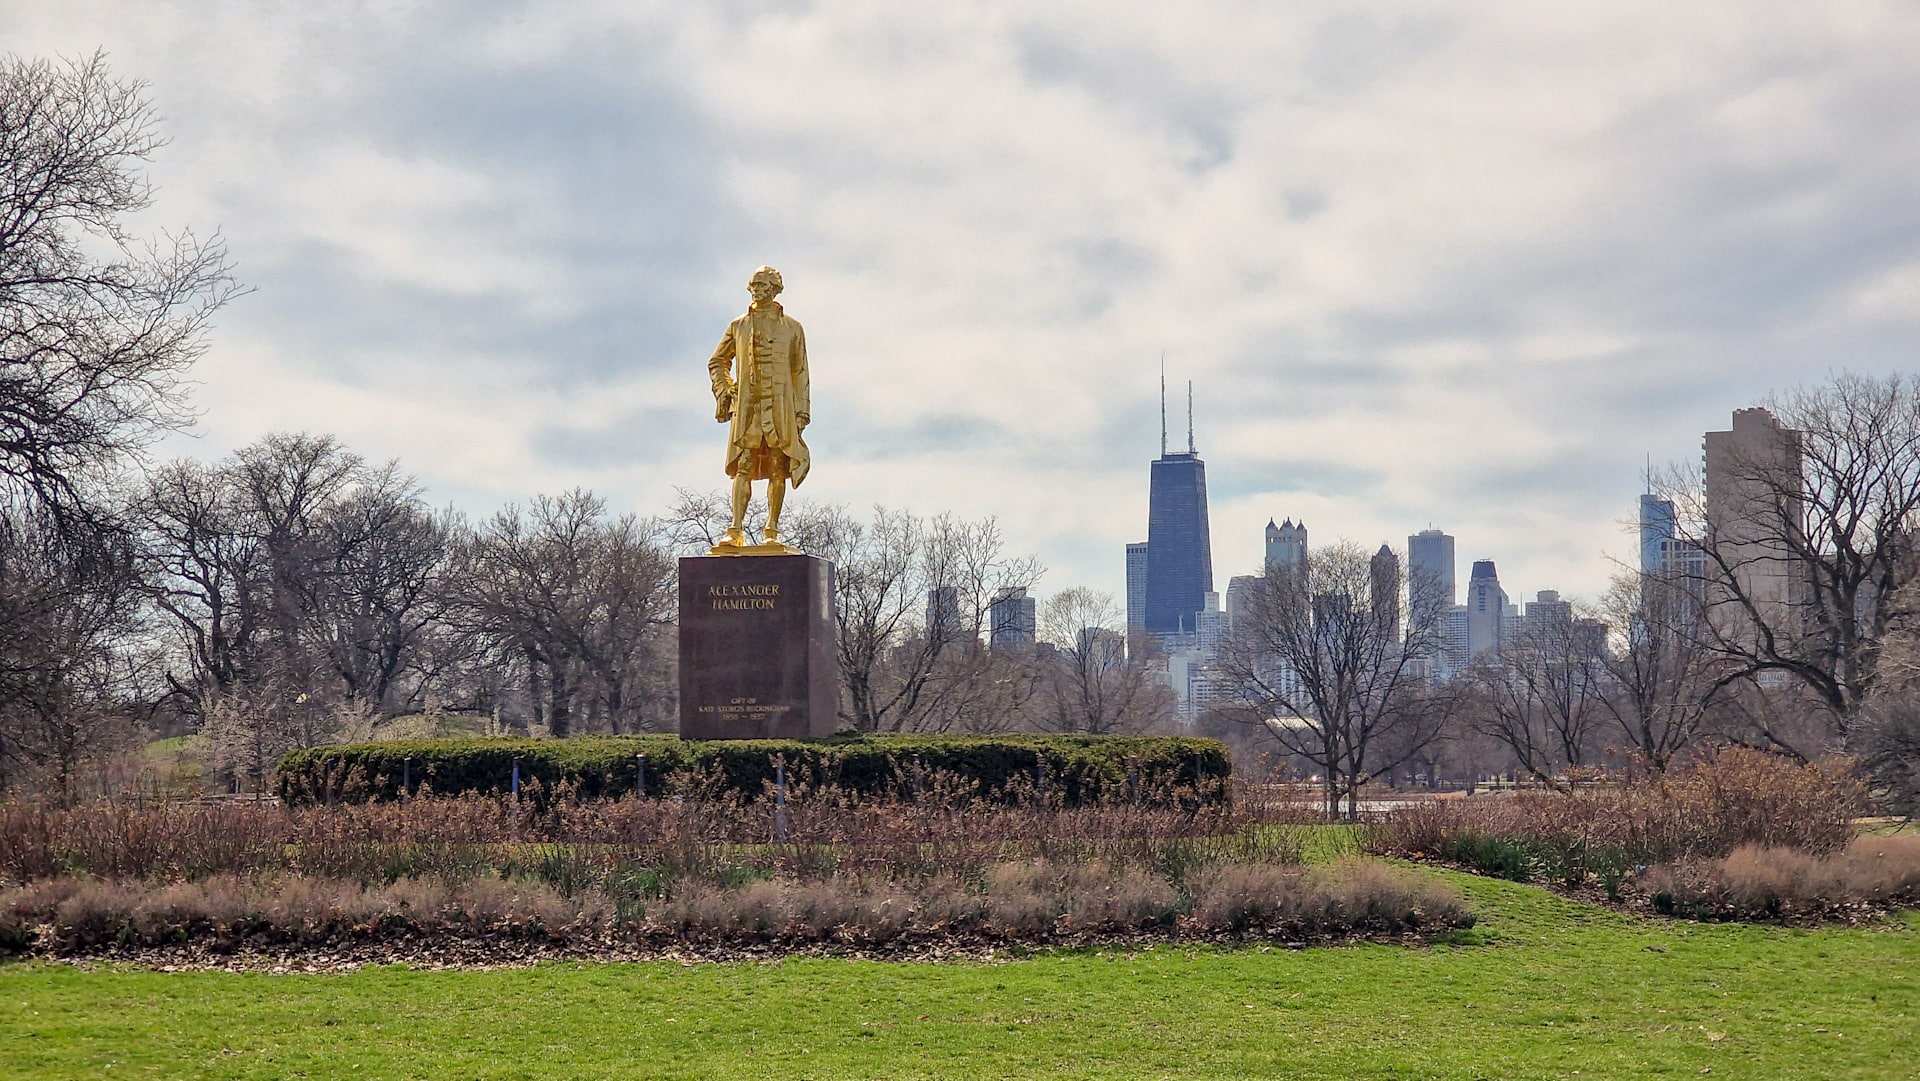 Lakeview is a diverse and lively neighborhood located on the city's North Side. Home to Chicago's gayborhood,  it also offers beautiful lakefront parks and beaches